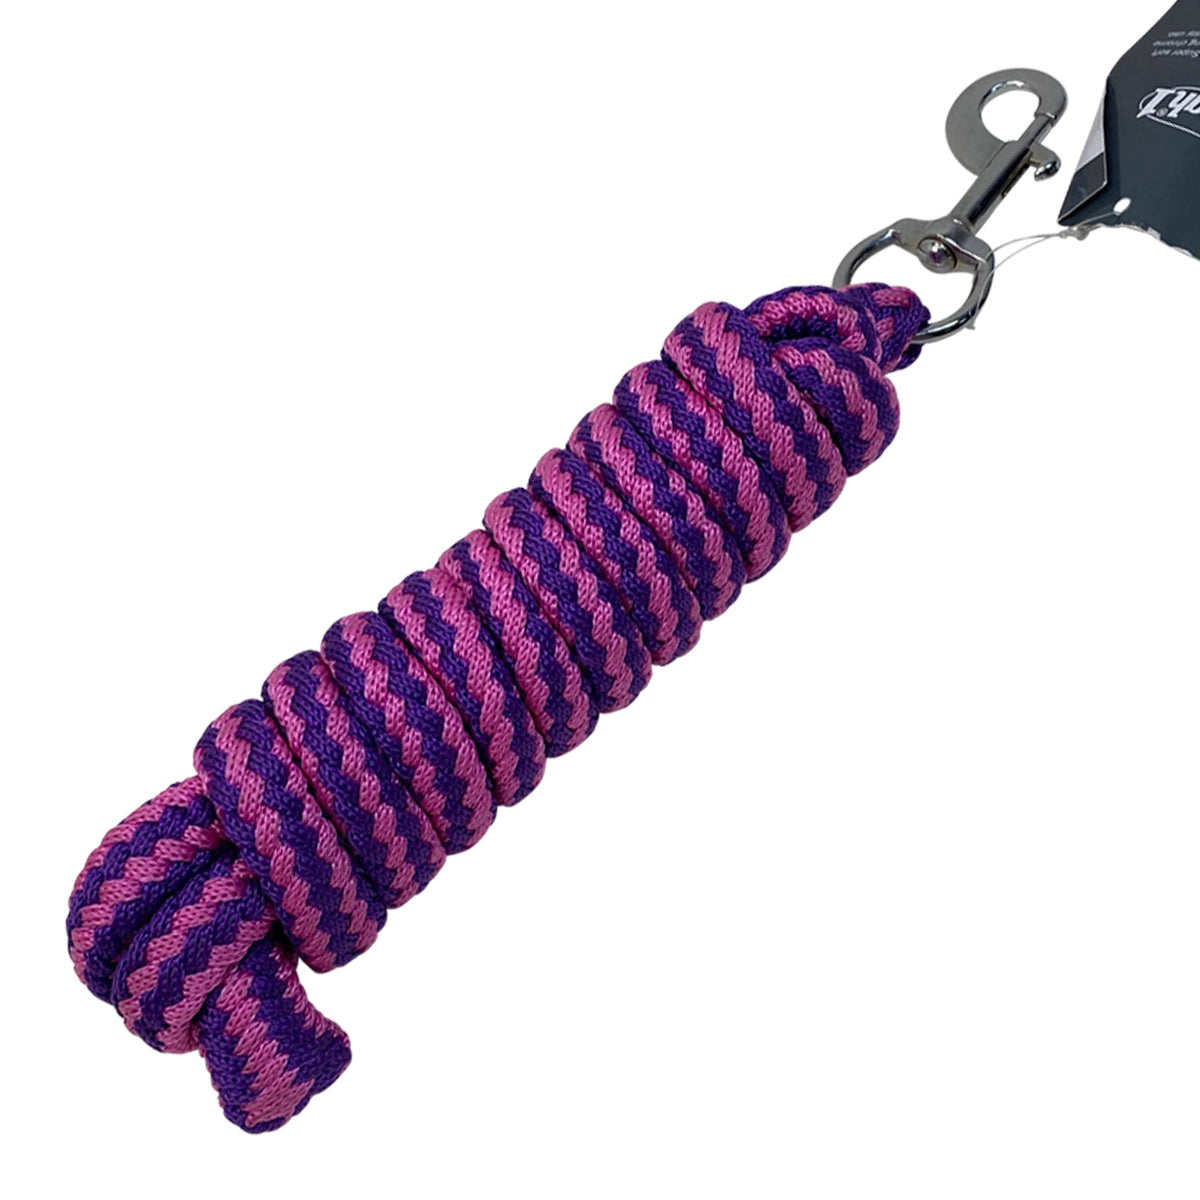 Tough1 Braided Poly Cord Lead Rope in Purple/Hot Pink